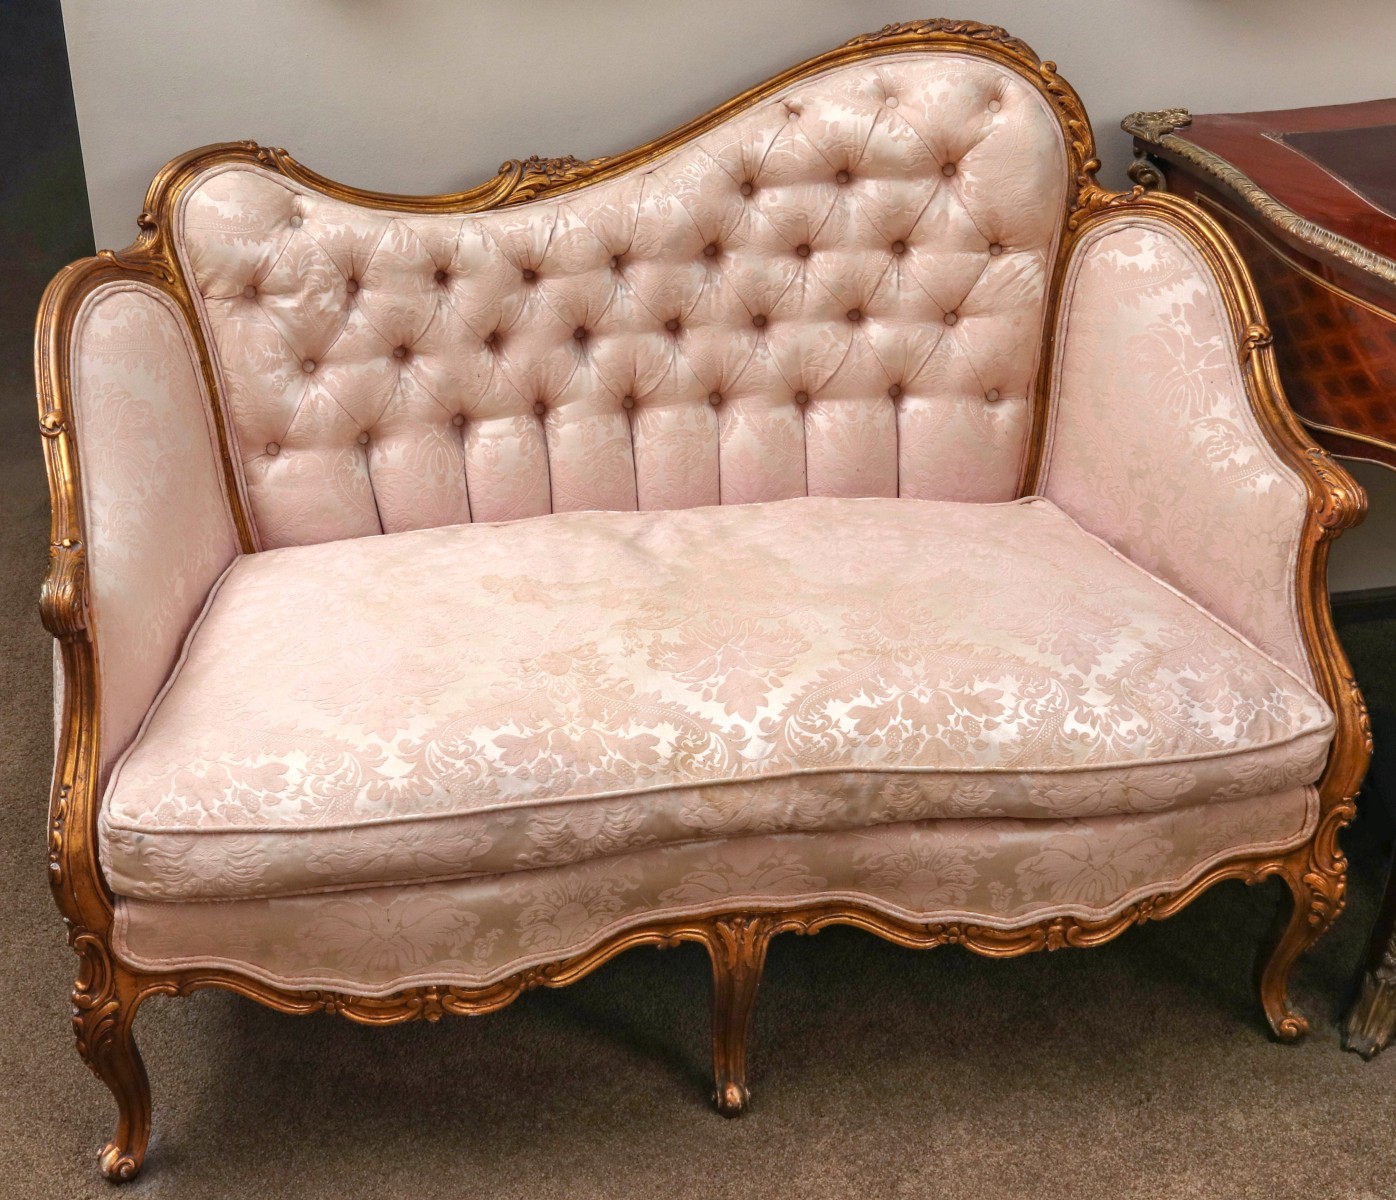 A LATE 20TH C. FRENCH STYLE SETTEE WITH PINK DAMASK